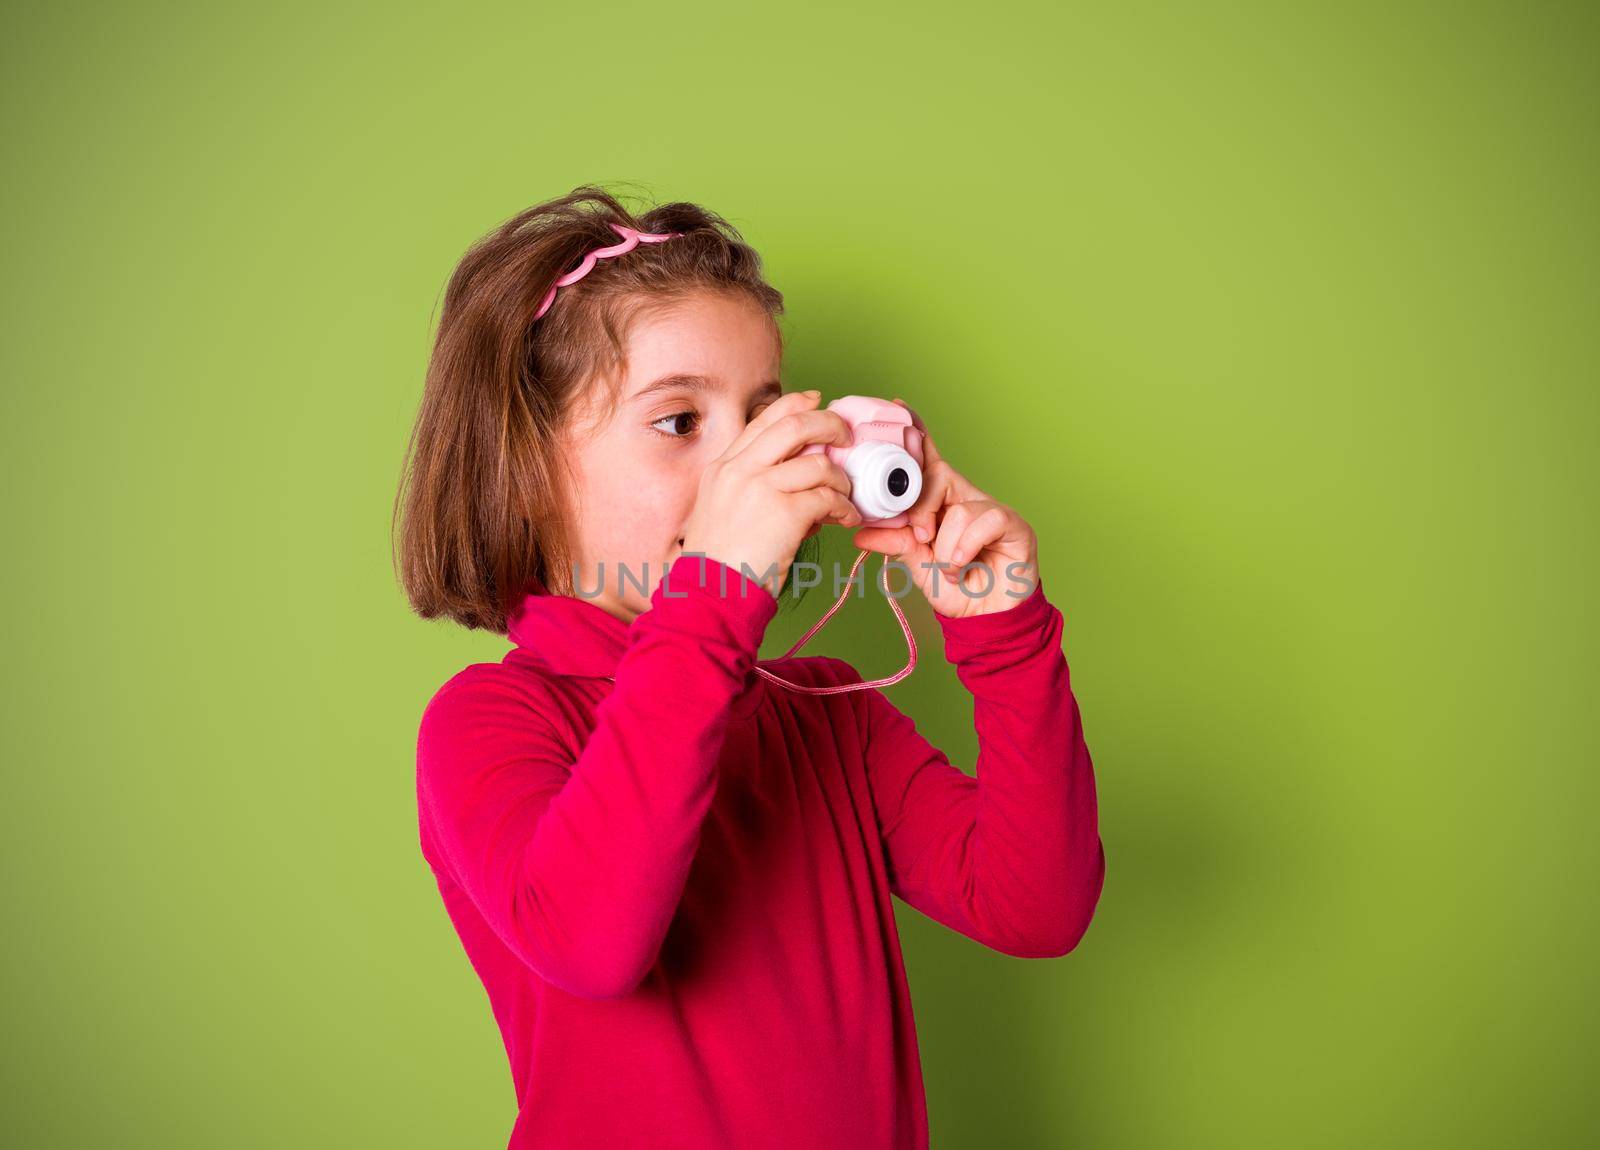 Little Girl Taking Picture Using Toy Photo Camera on green background